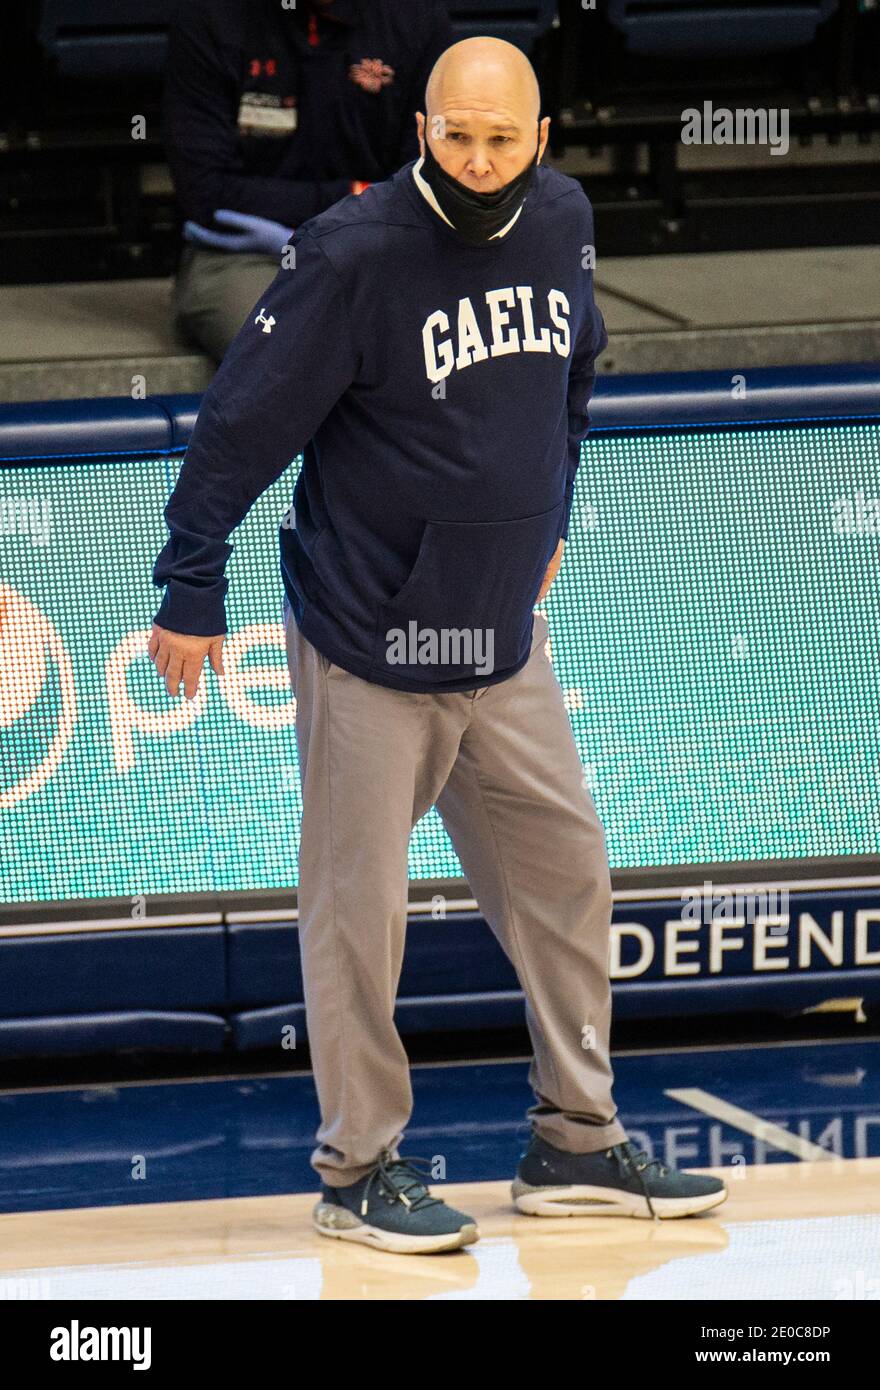 Moraga, CA U.S. 30th Dec, 2020. A. St. Mary's Gaels head coach Randy Bennett look over the defense during the NCAA Men's Basketball game between Sacramento State Hornets and the Saint Mary's Gaels 63-45 win at McKeon Pavilion Moraga Calif. Thurman James/CSM/Alamy Live News Stock Photo